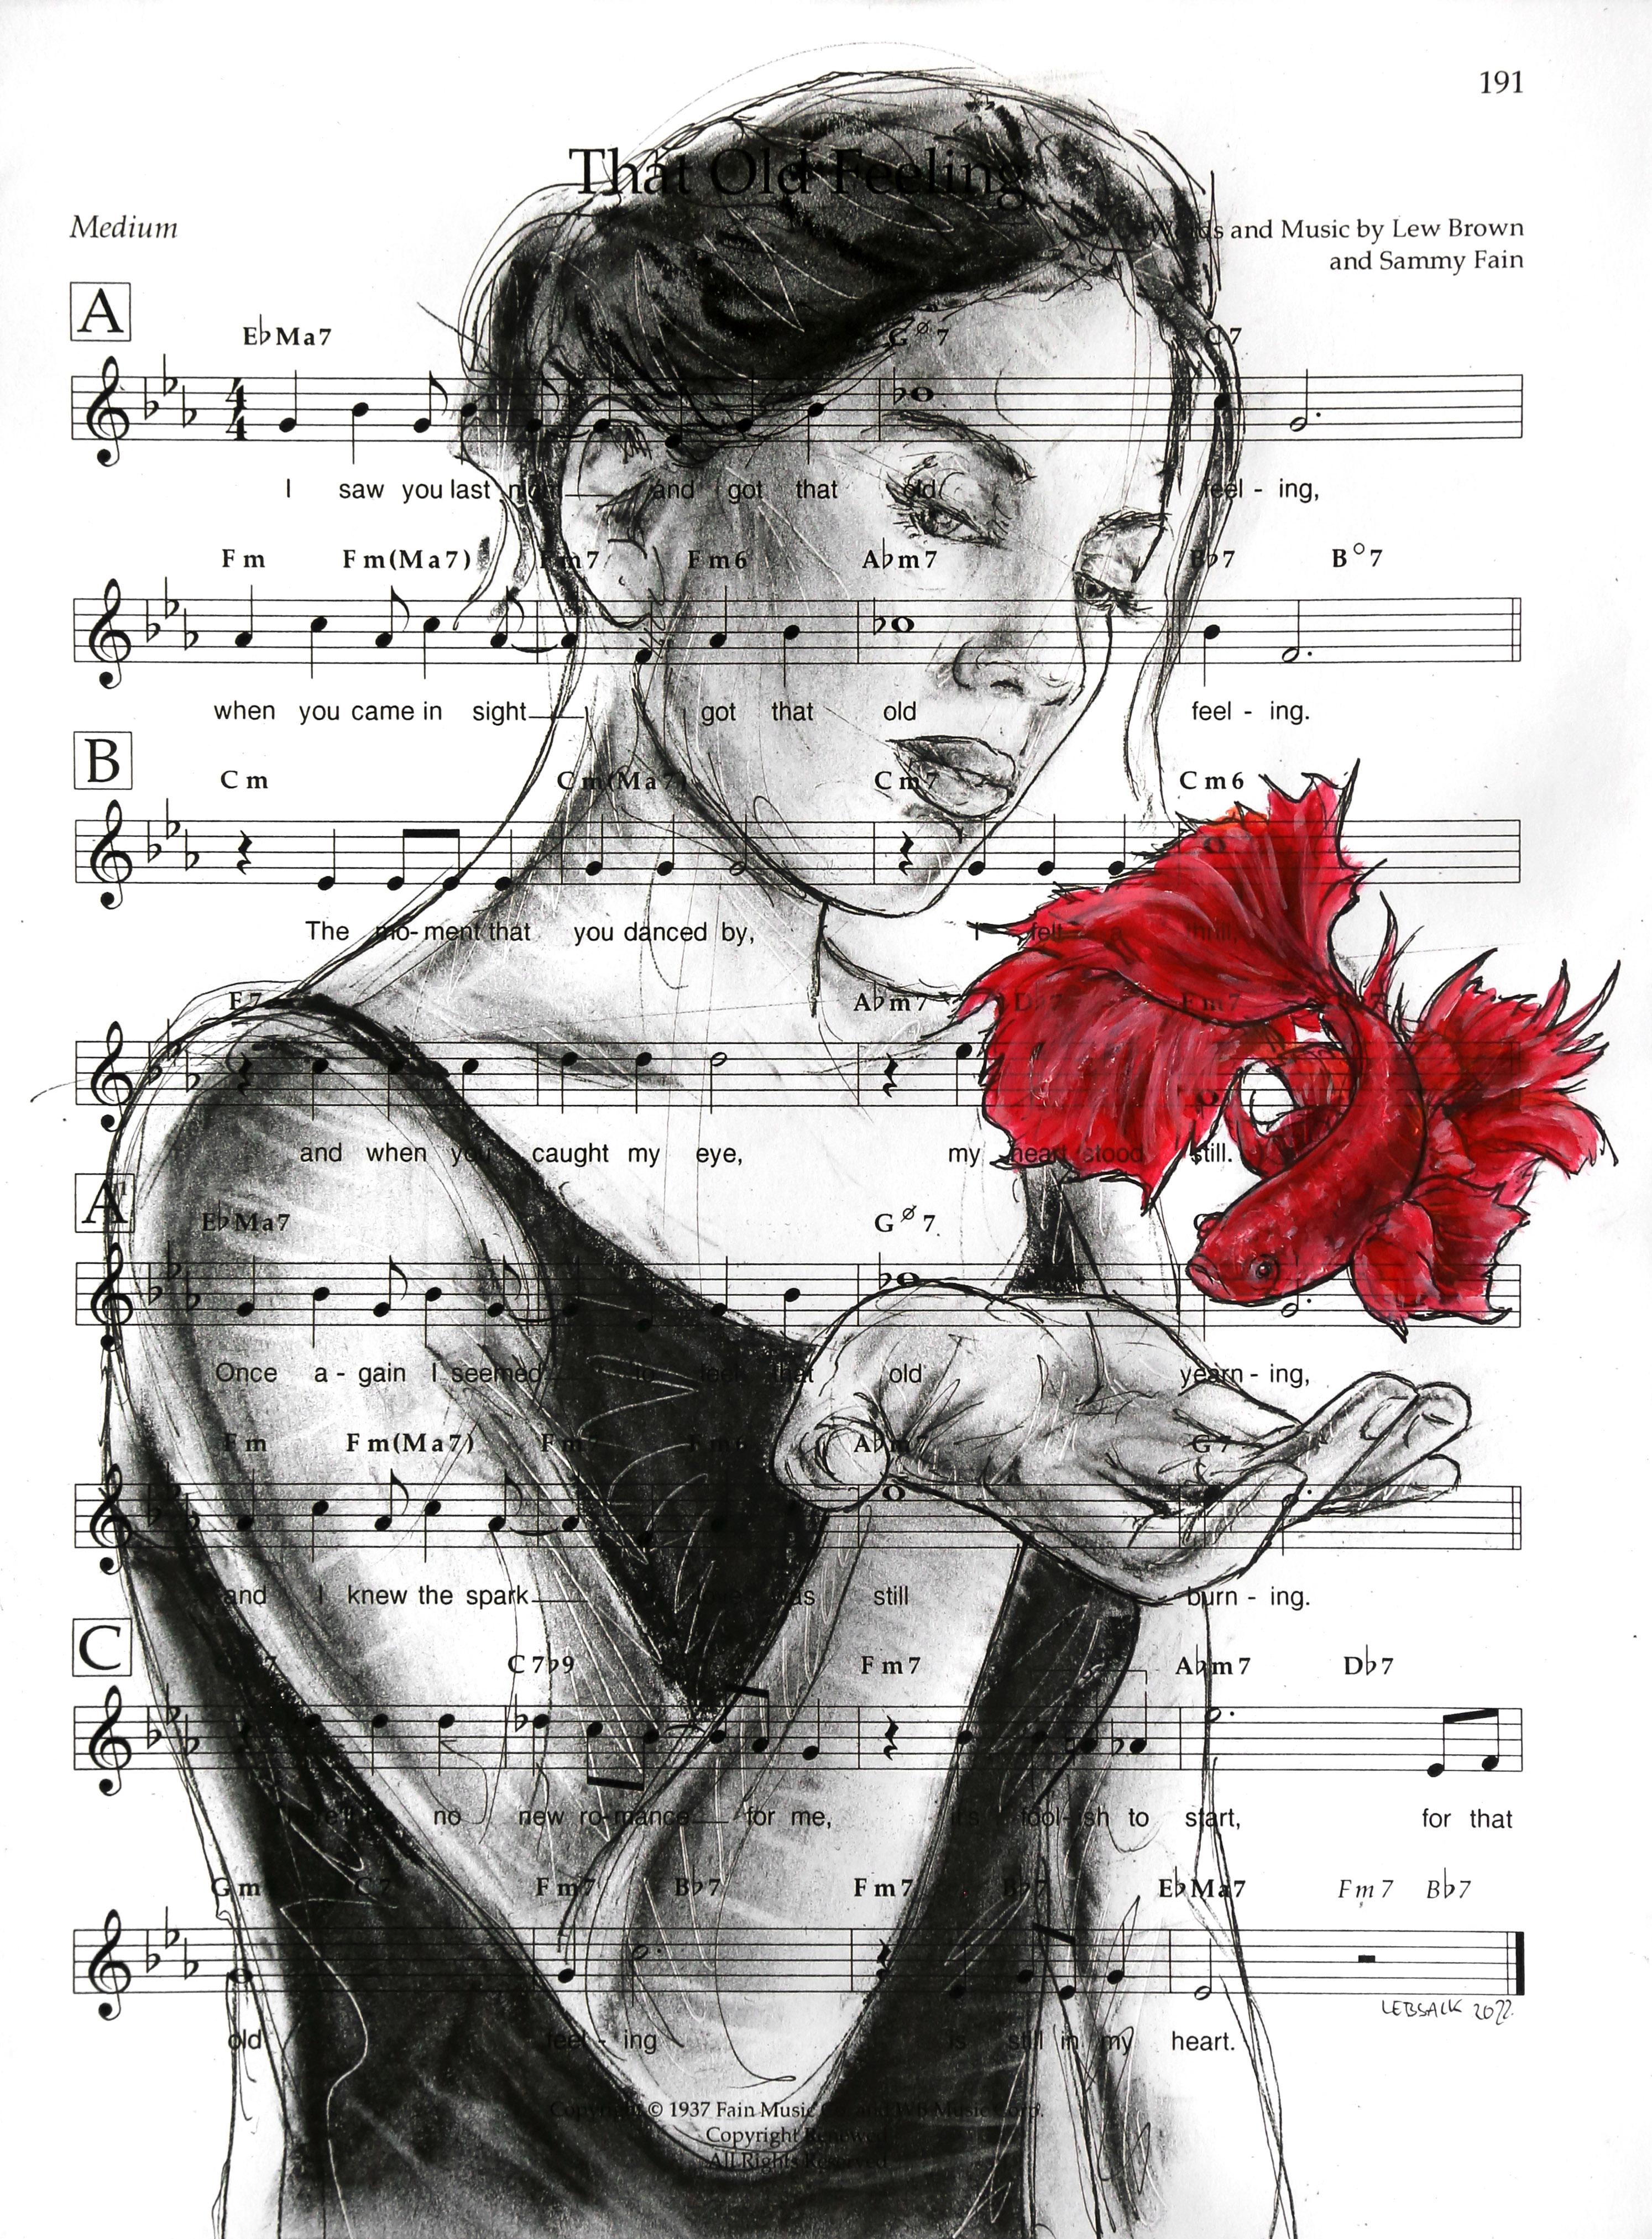 In My Heart - Original Charcoal on Sheet Music